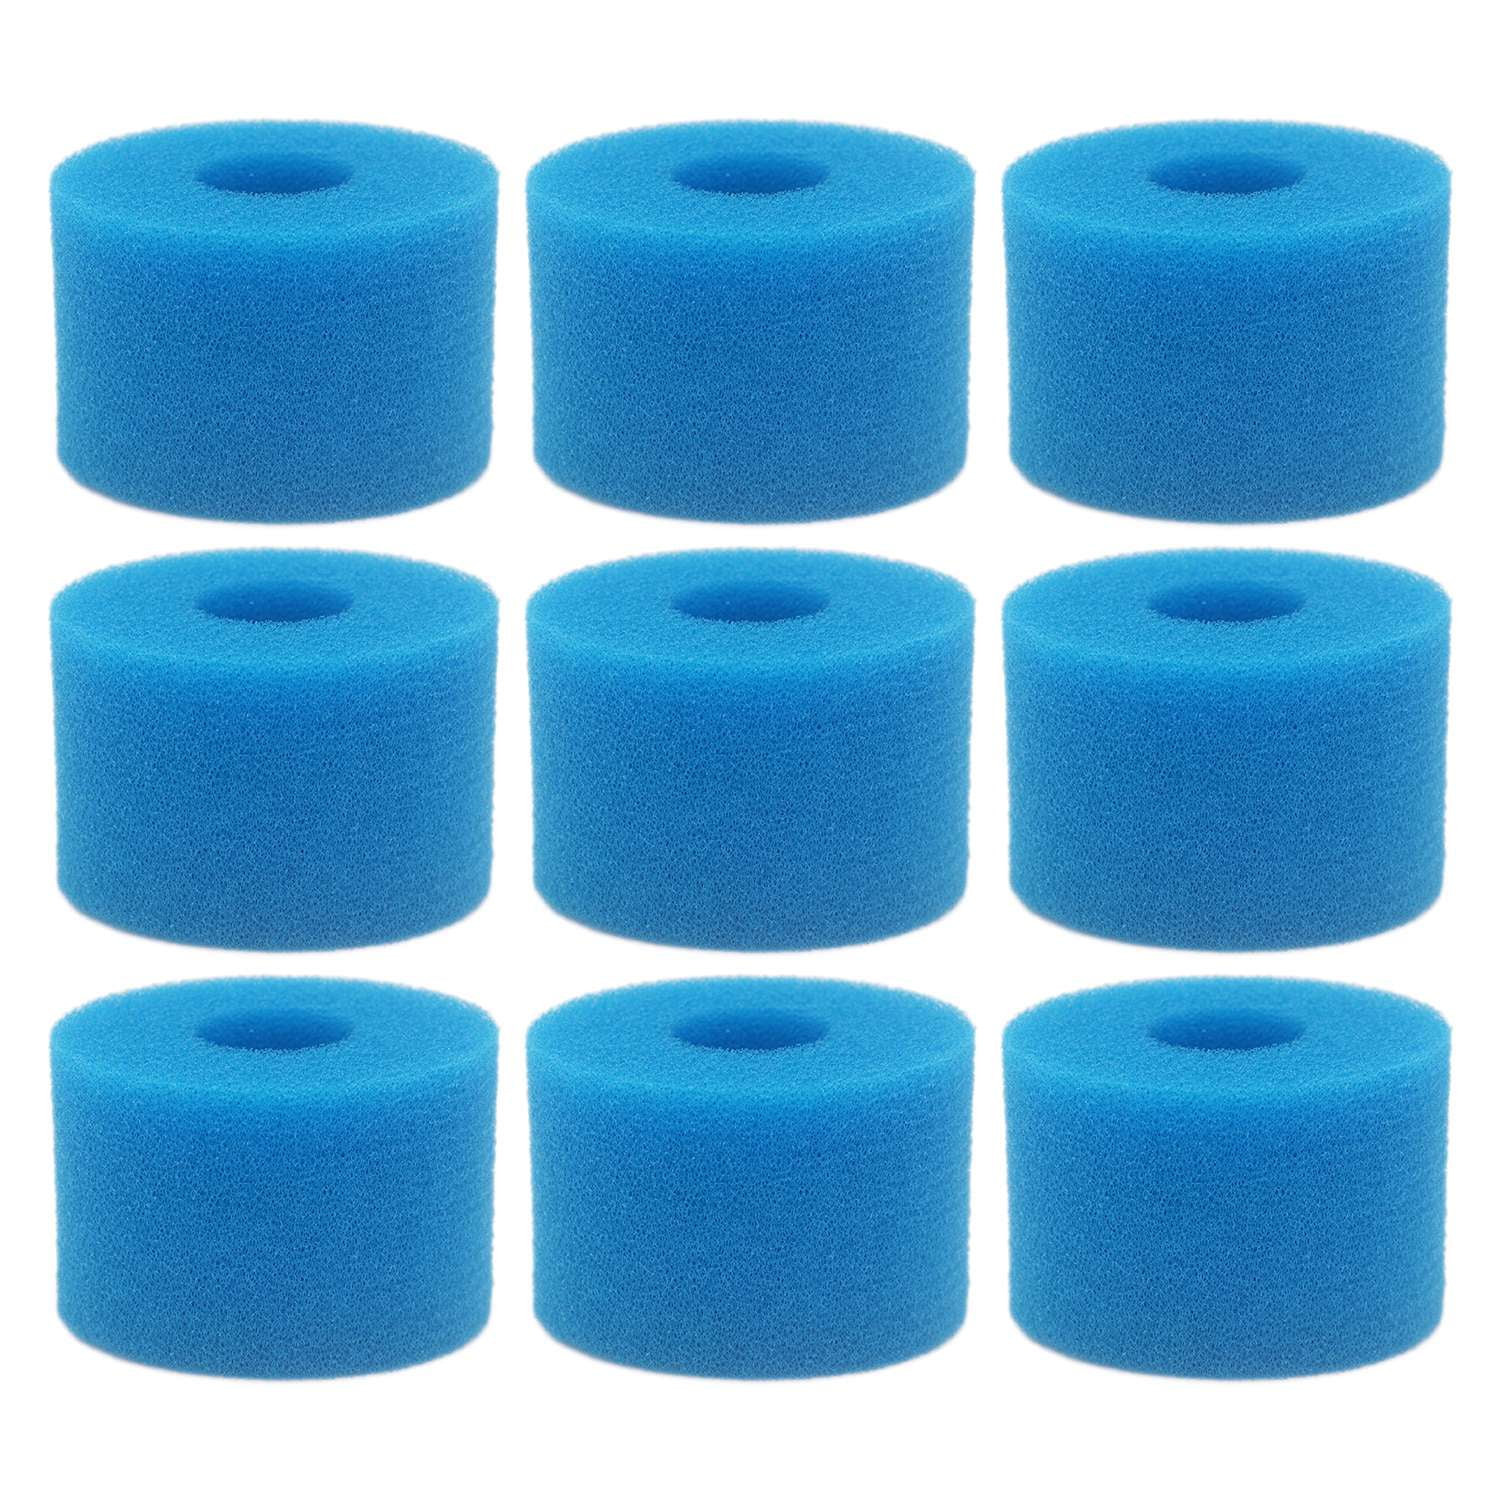 S1 2* For Intex Pure Spa Reusable/Washable Foam Hot Tub-Filter Cartridge Type